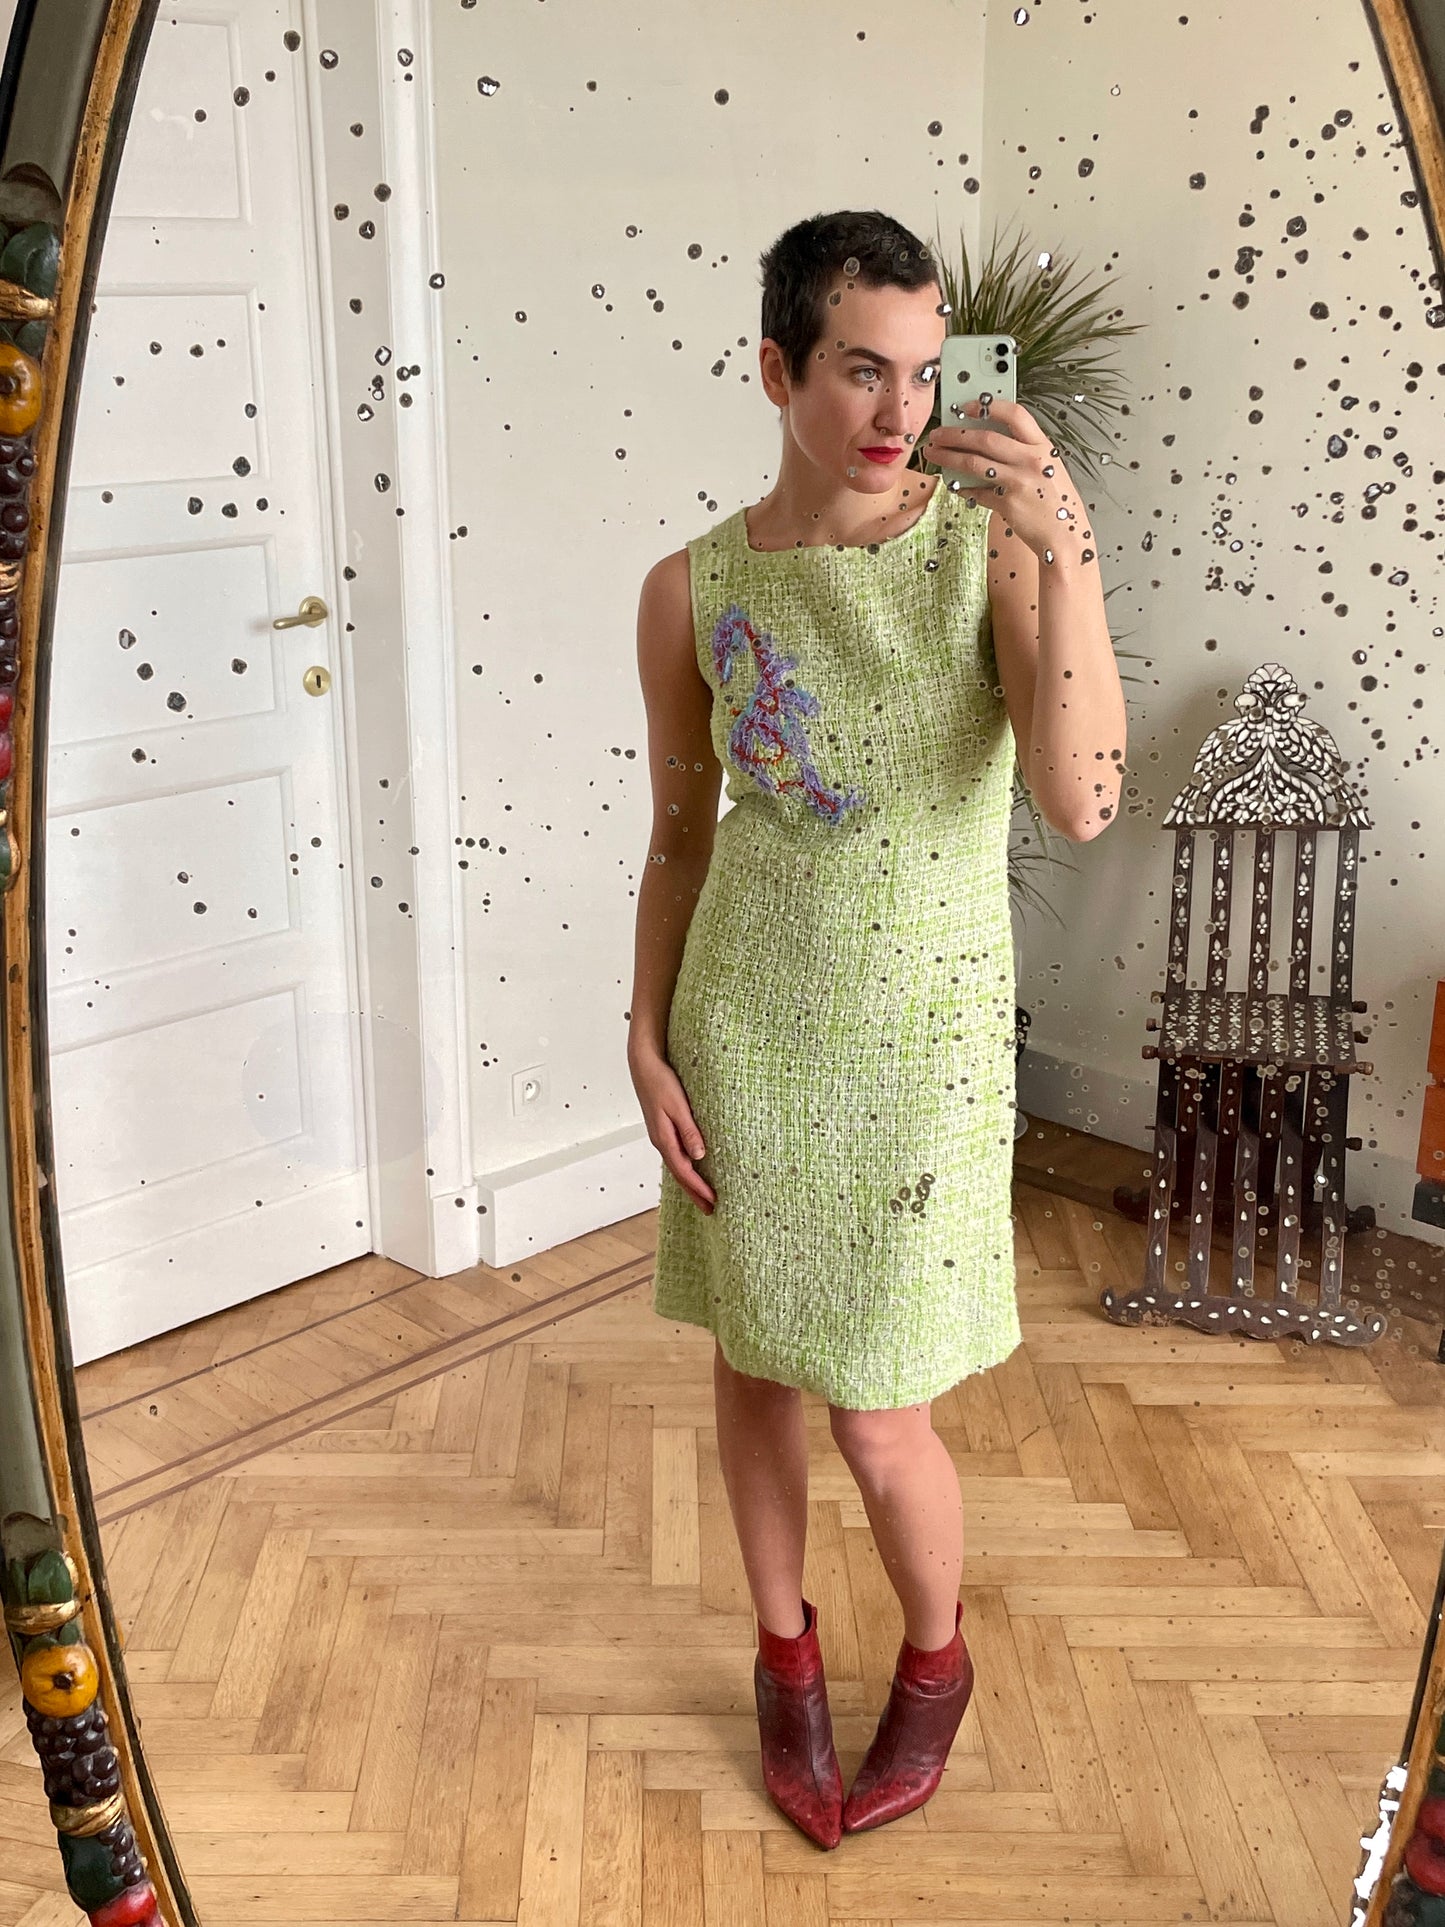 Christian Lacroix 90's apple green knit dress with floral embroidery